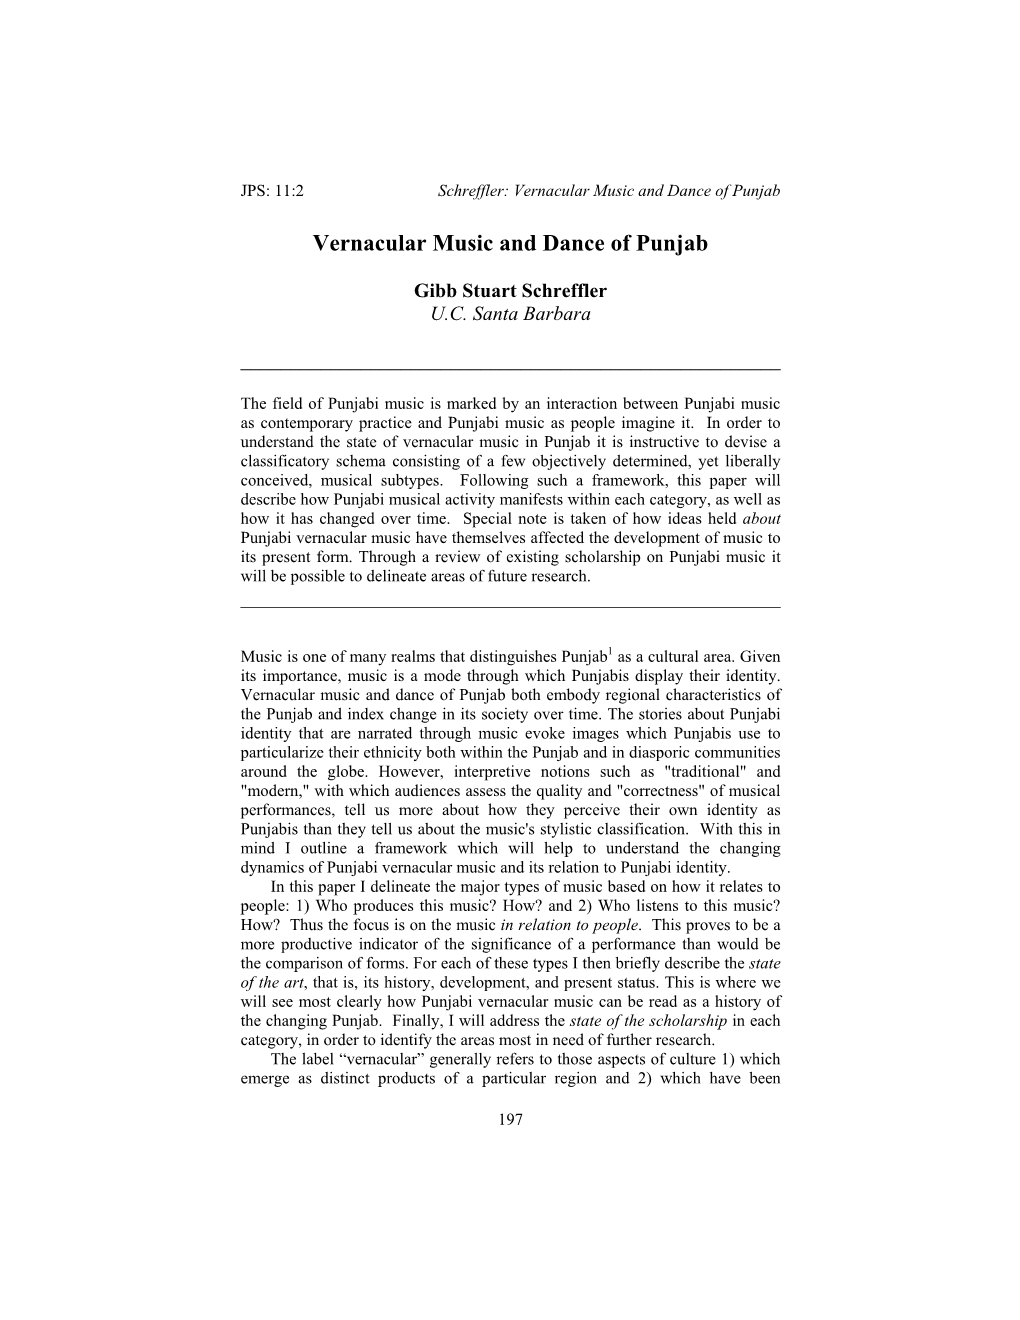 Sample Page of Text